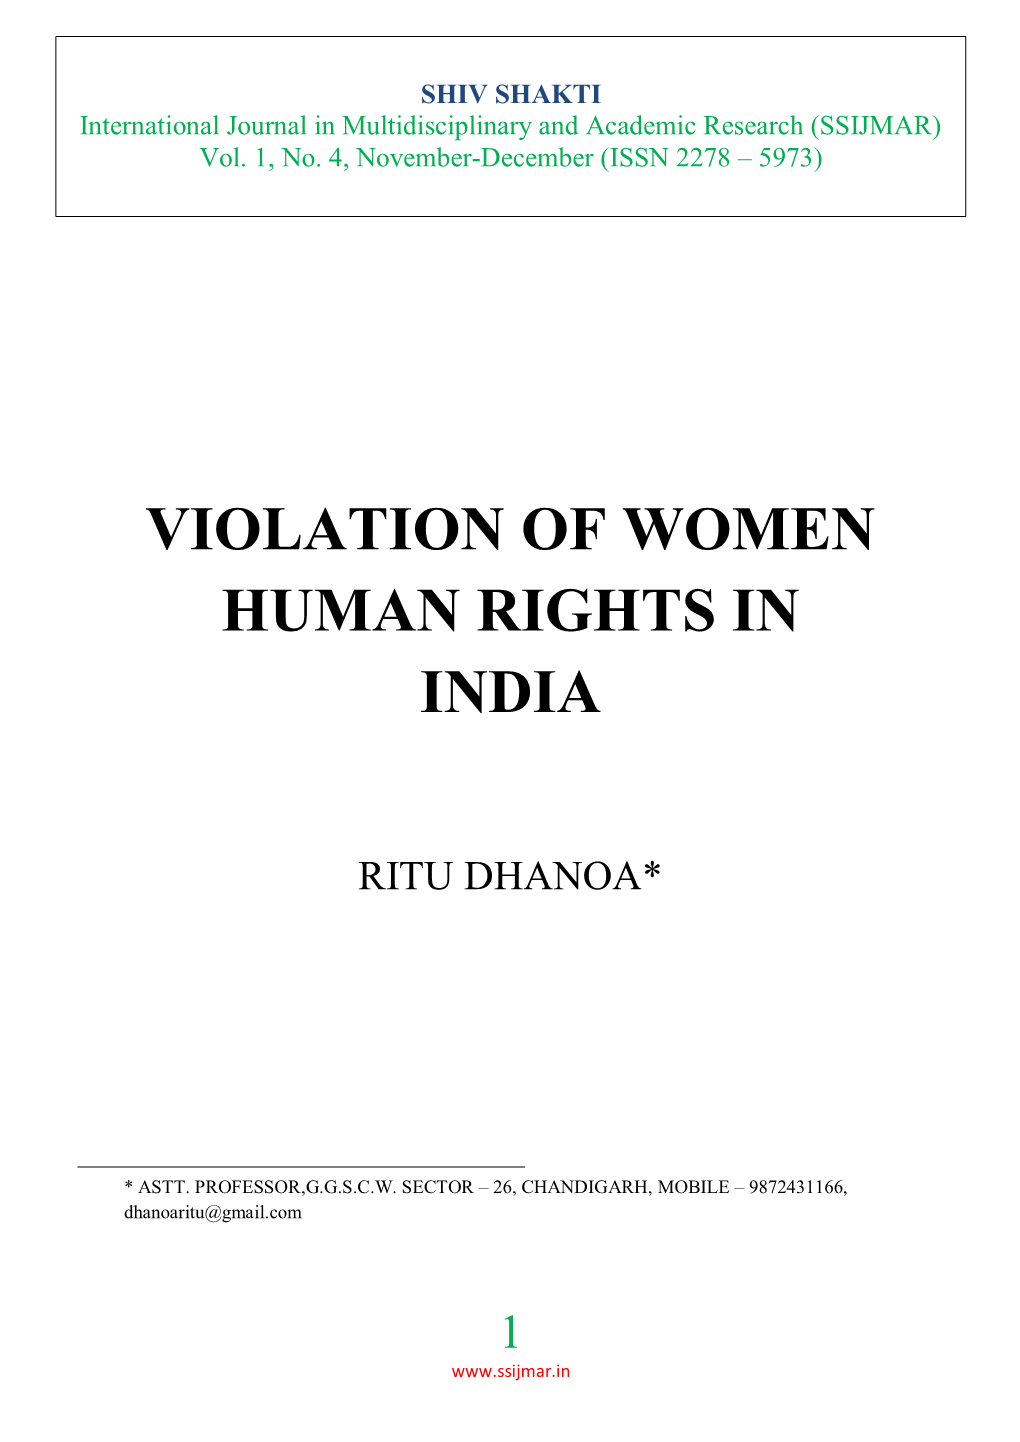 Violation of Women Human Rights in India